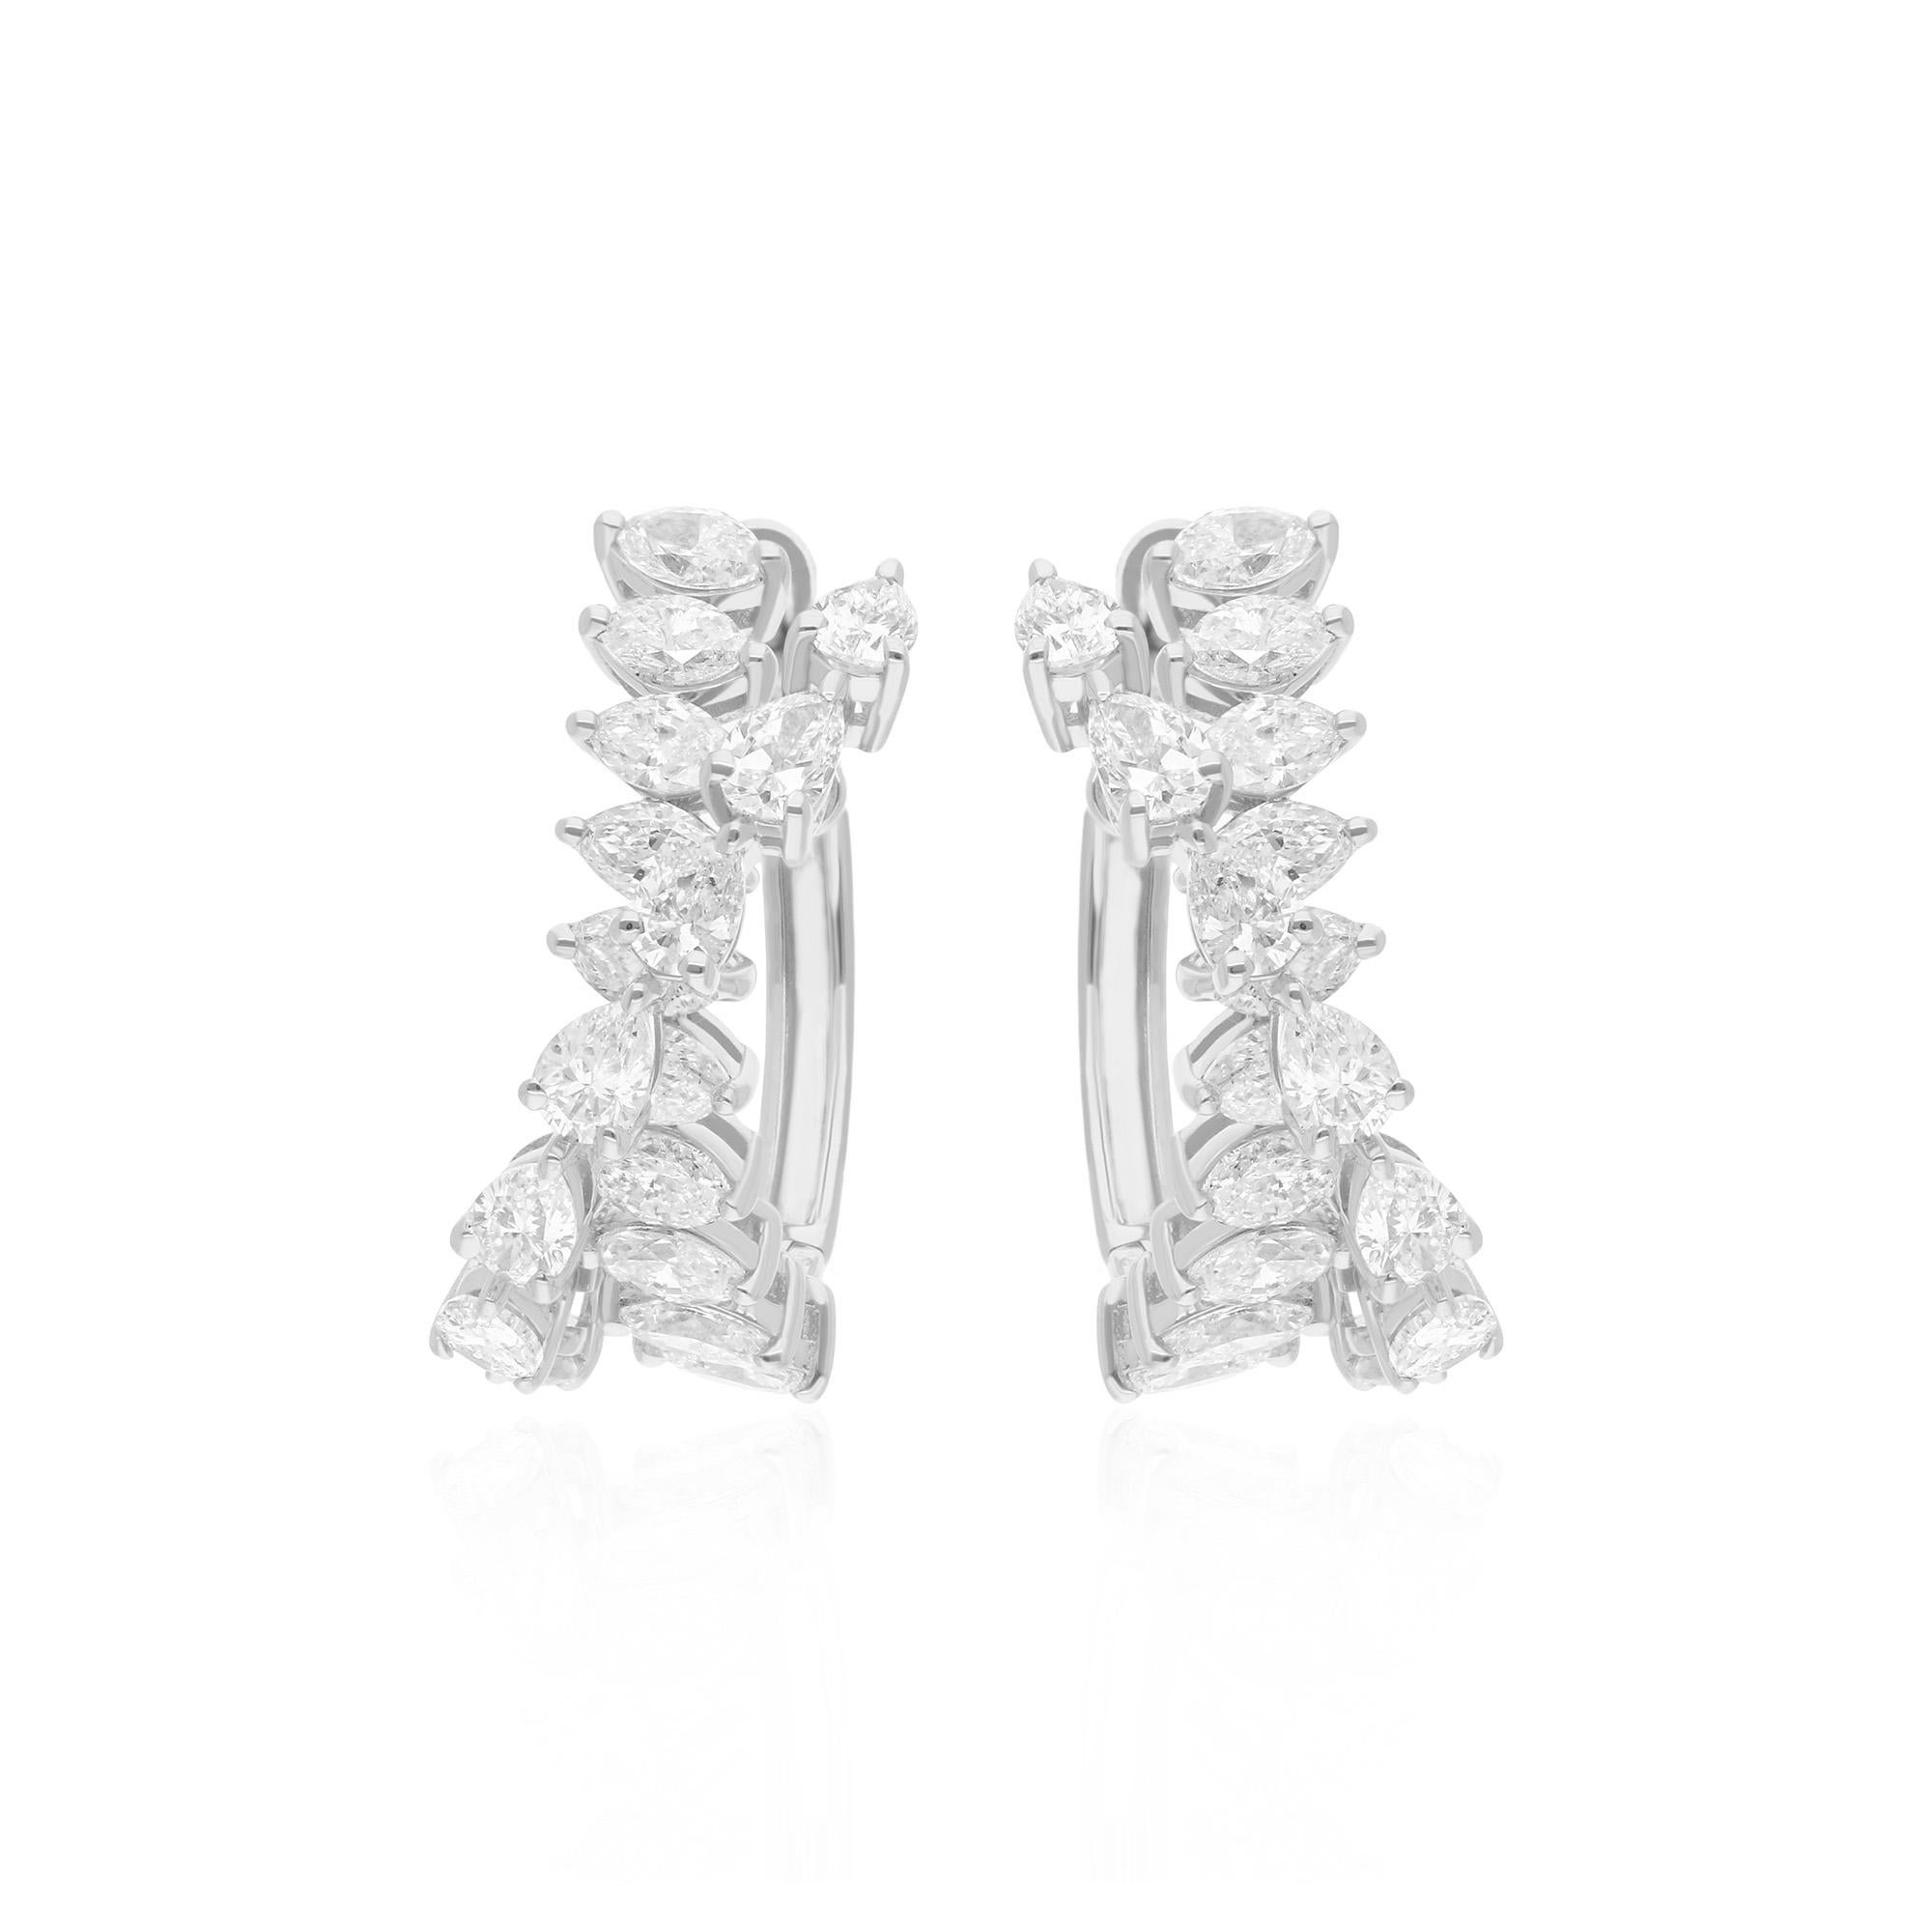 Crafted with precision and artistry, these earrings boast a harmonious blend of classic design and modern sophistication. The lustrous 18 Karat White Gold setting provides the perfect backdrop for the diamonds, accentuating their brilliance and